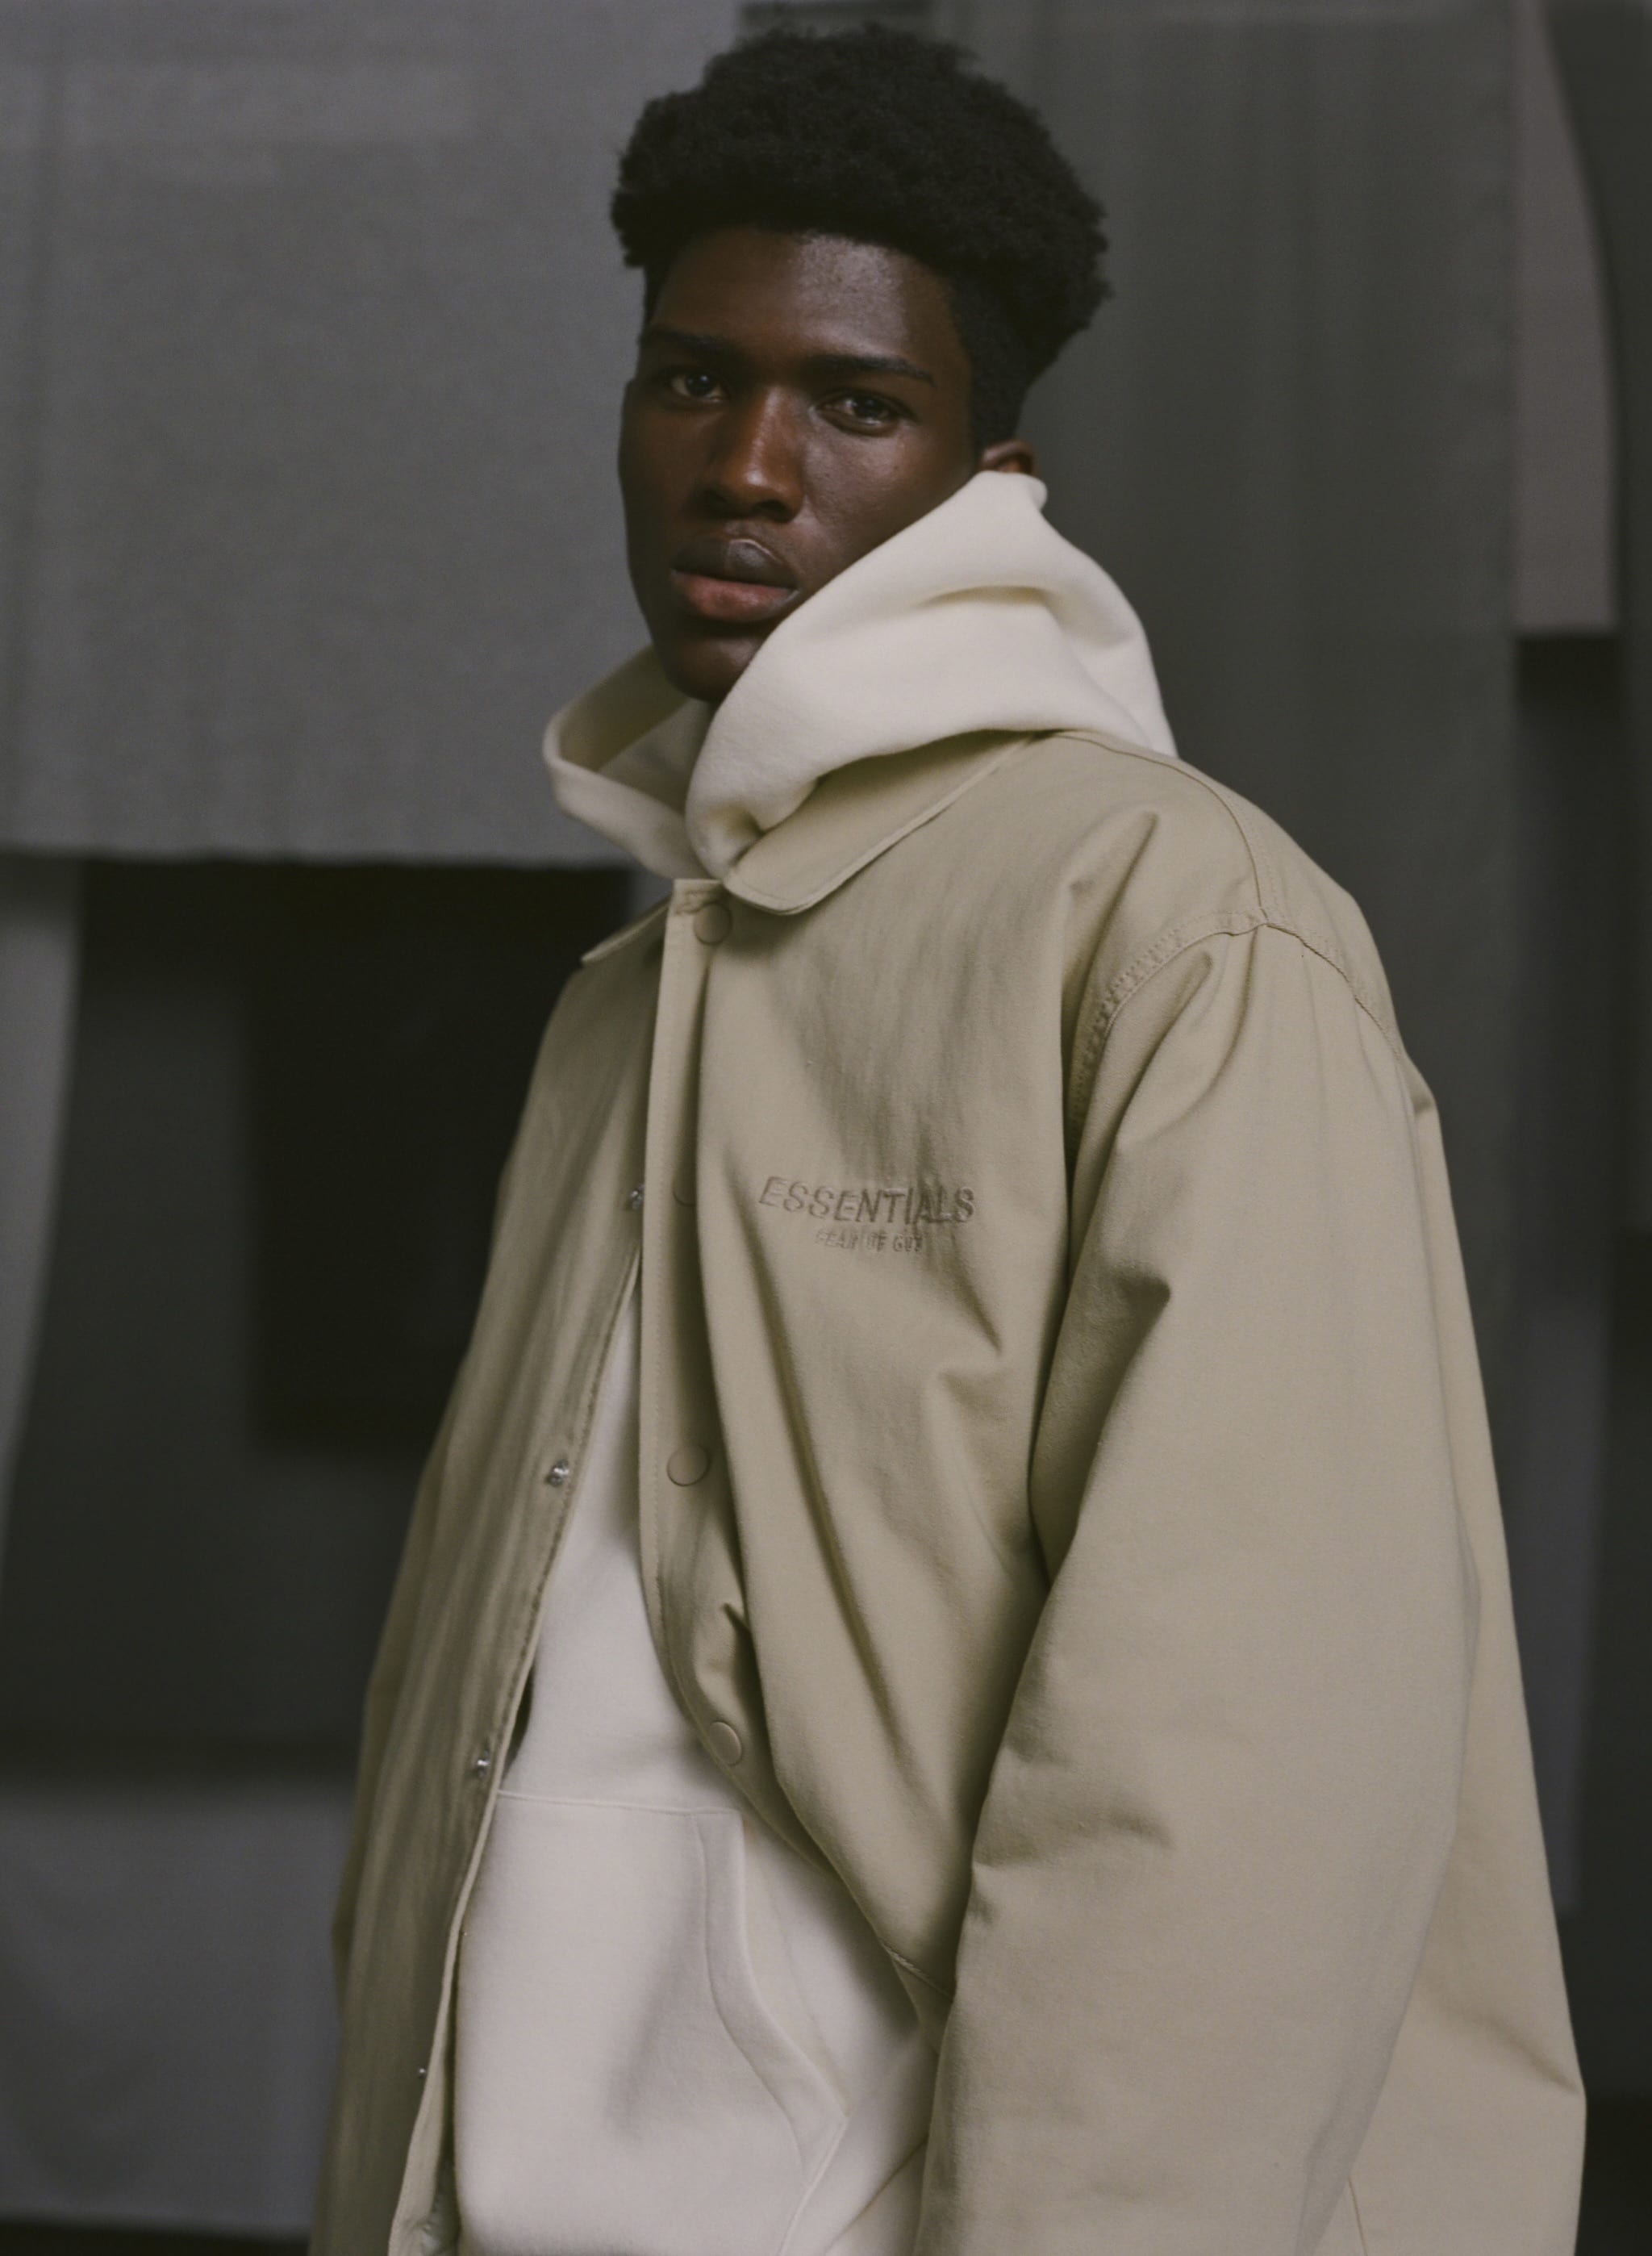 fear-of-god-essentials-collection-fall-2019 (5)